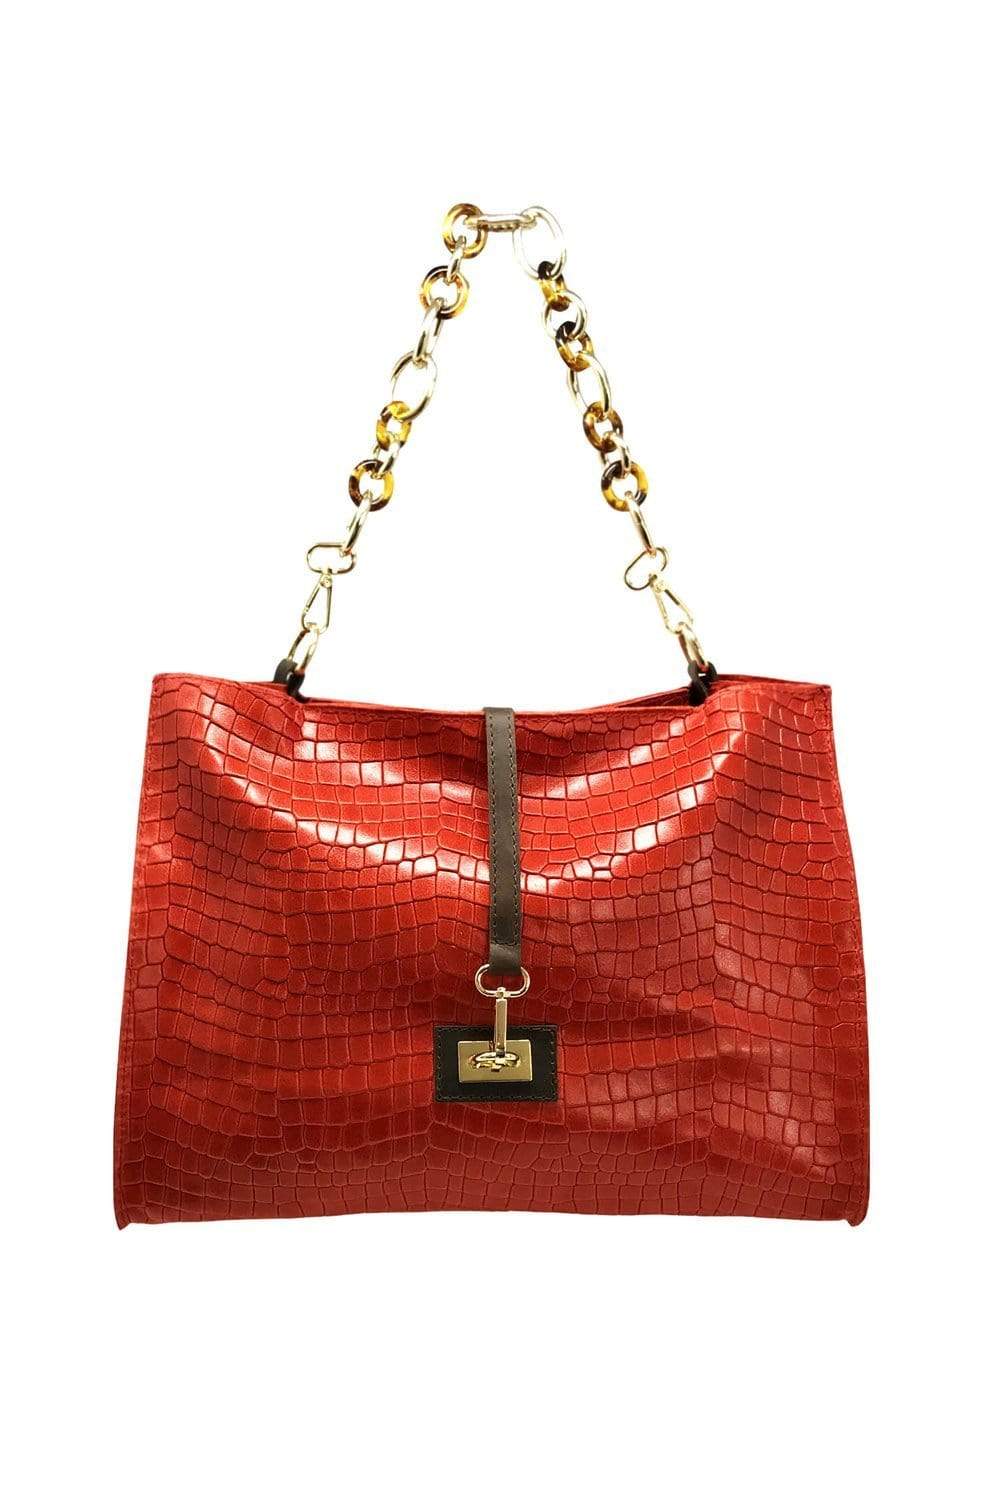 Bright Colors Crossbody or Shoulder Acrylic Chain Bag Strap / 